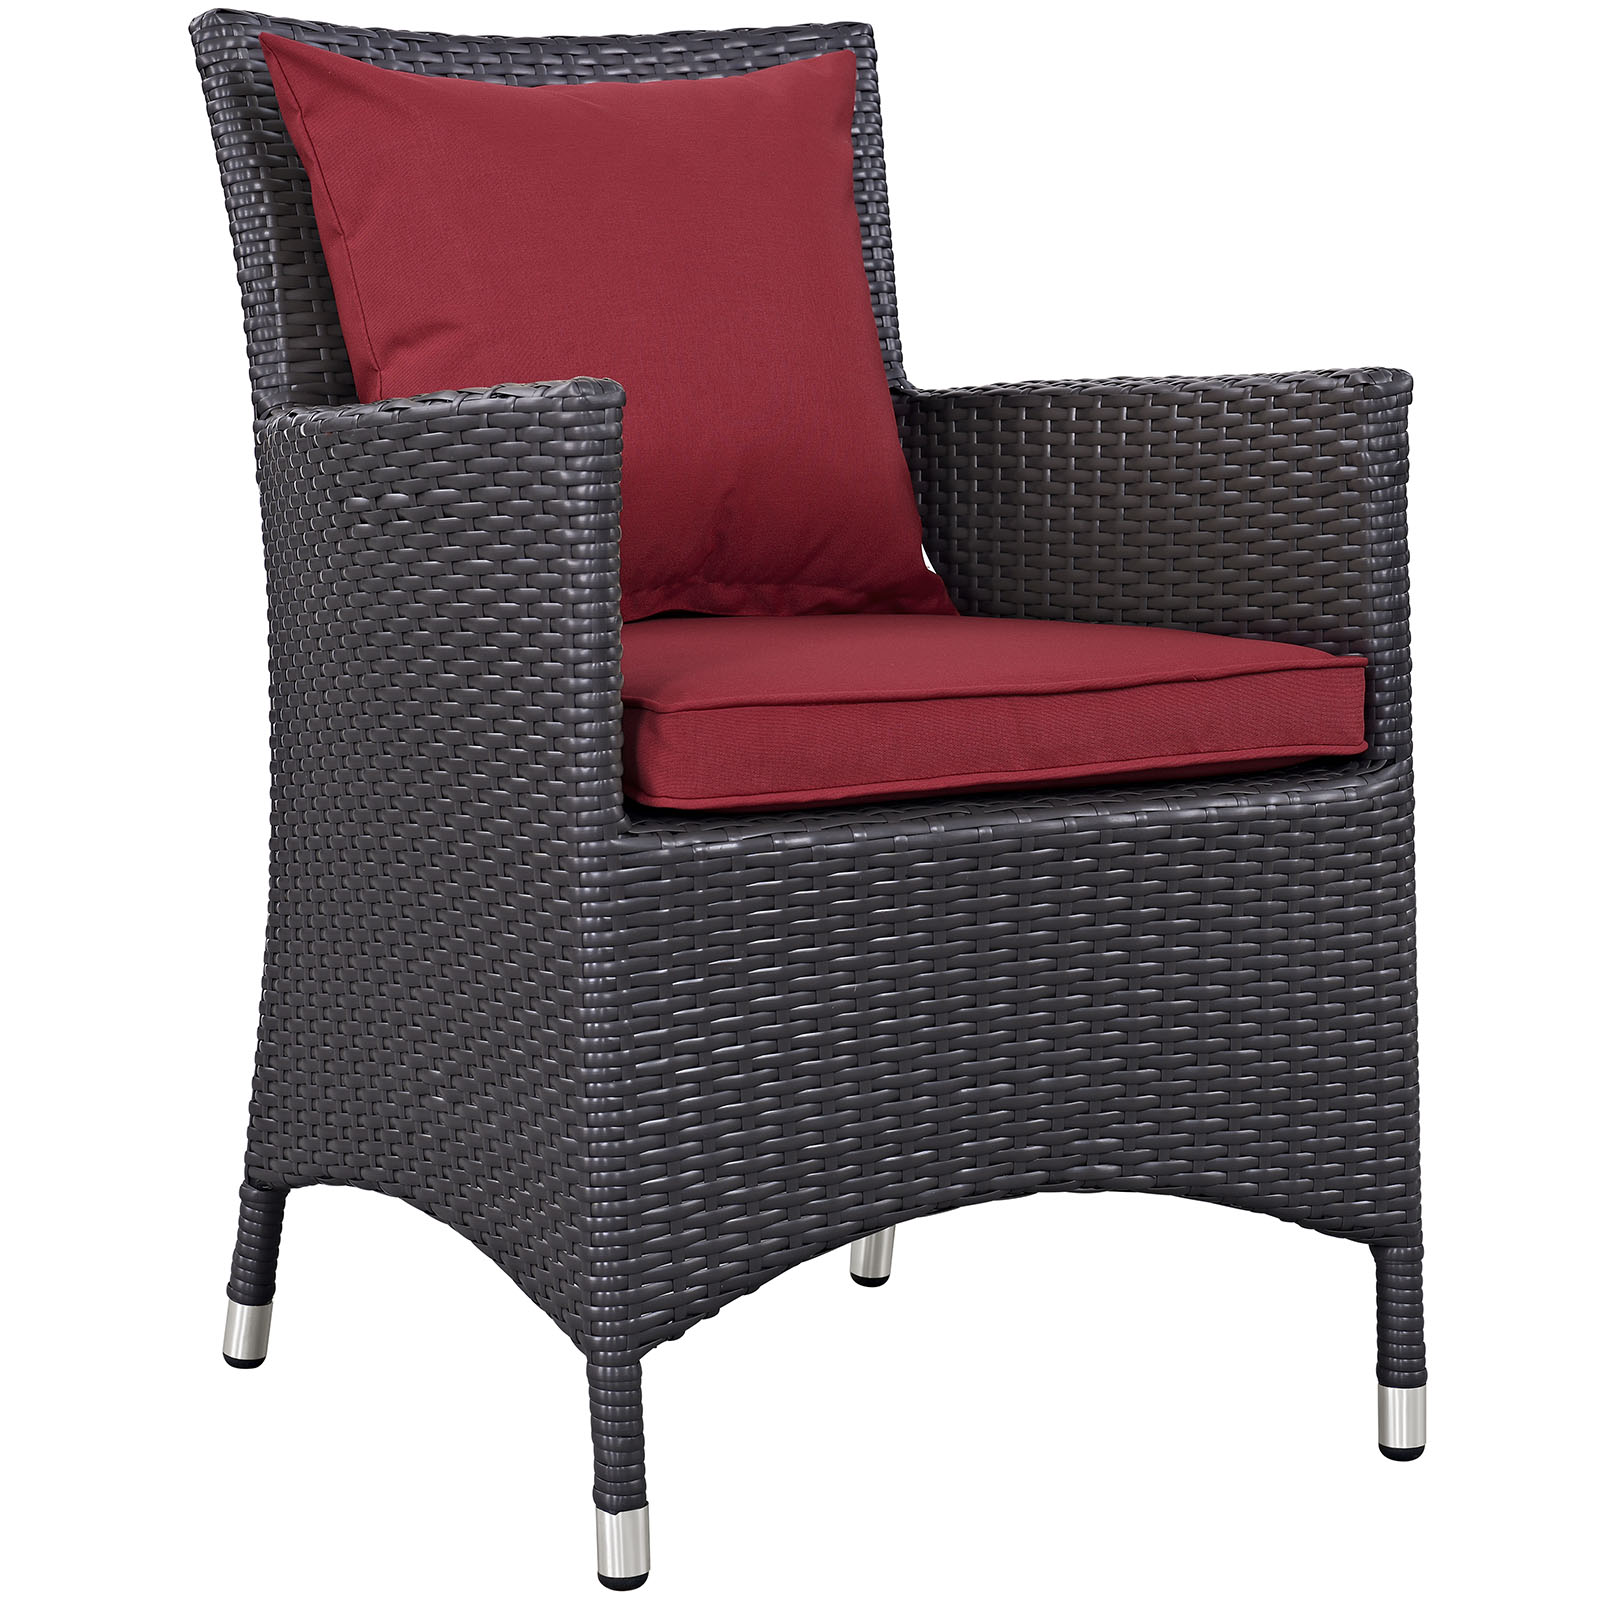 Modway Convene 8 Piece Outdoor Patio Dining Set in Espresso Red - image 3 of 6